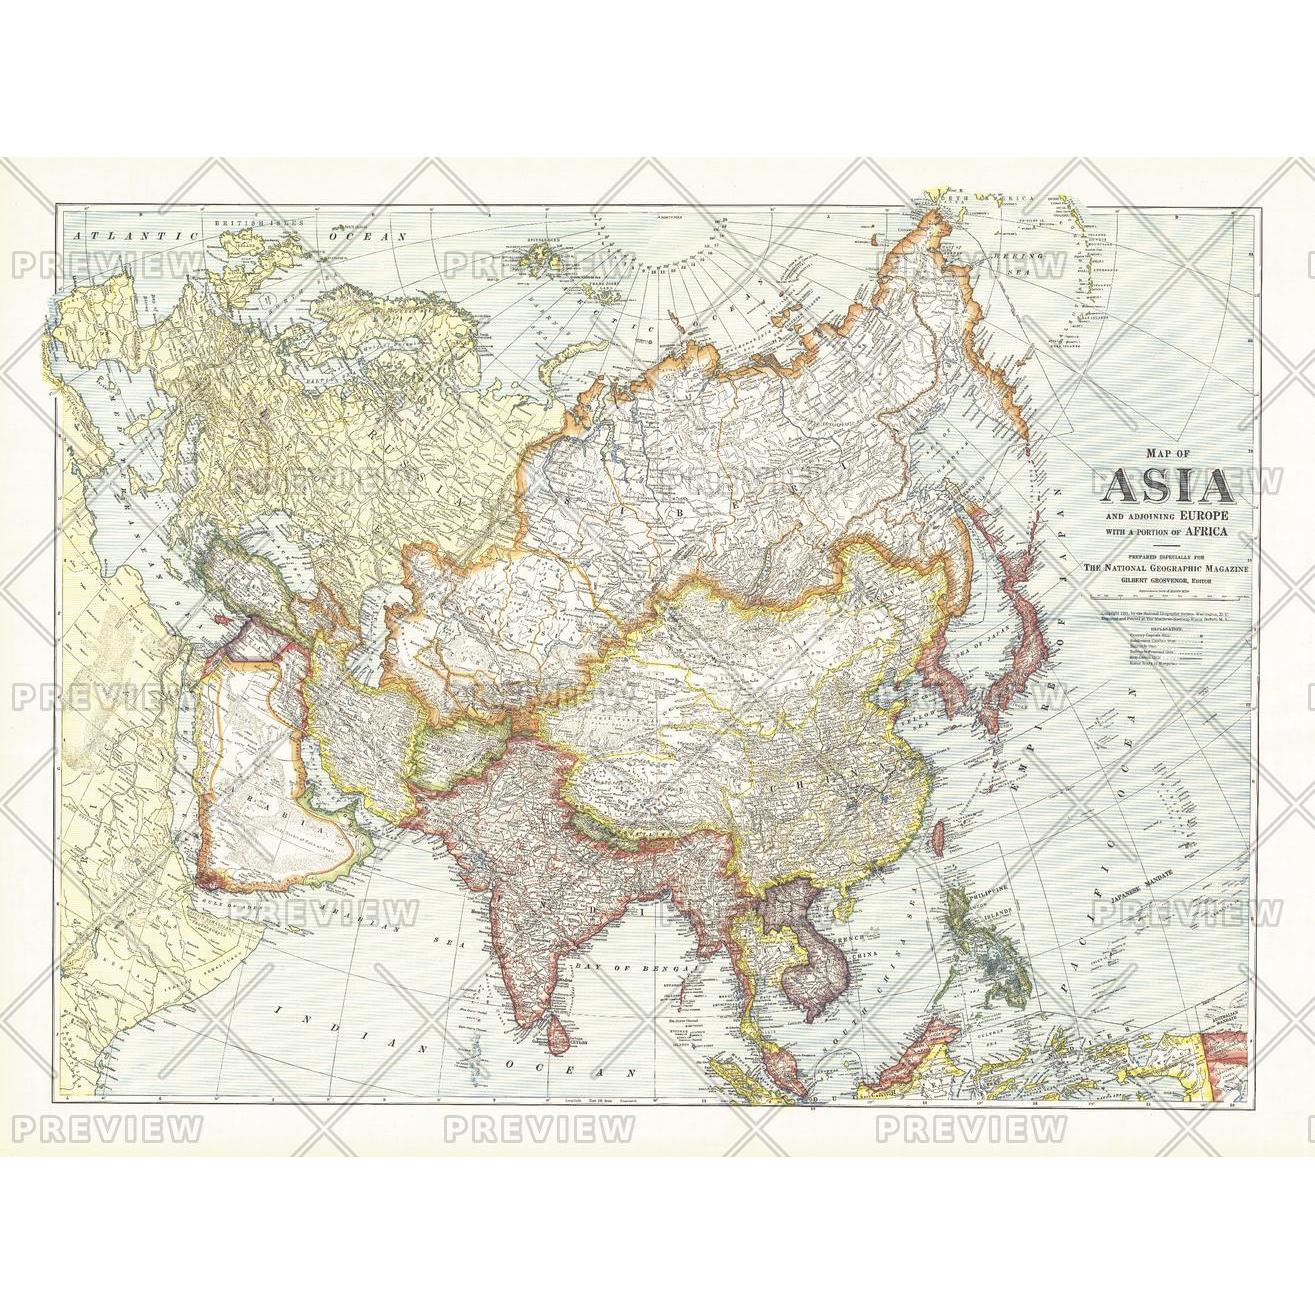 Map of Asia with Europe and a portion of Africa - Published 1921 by ...